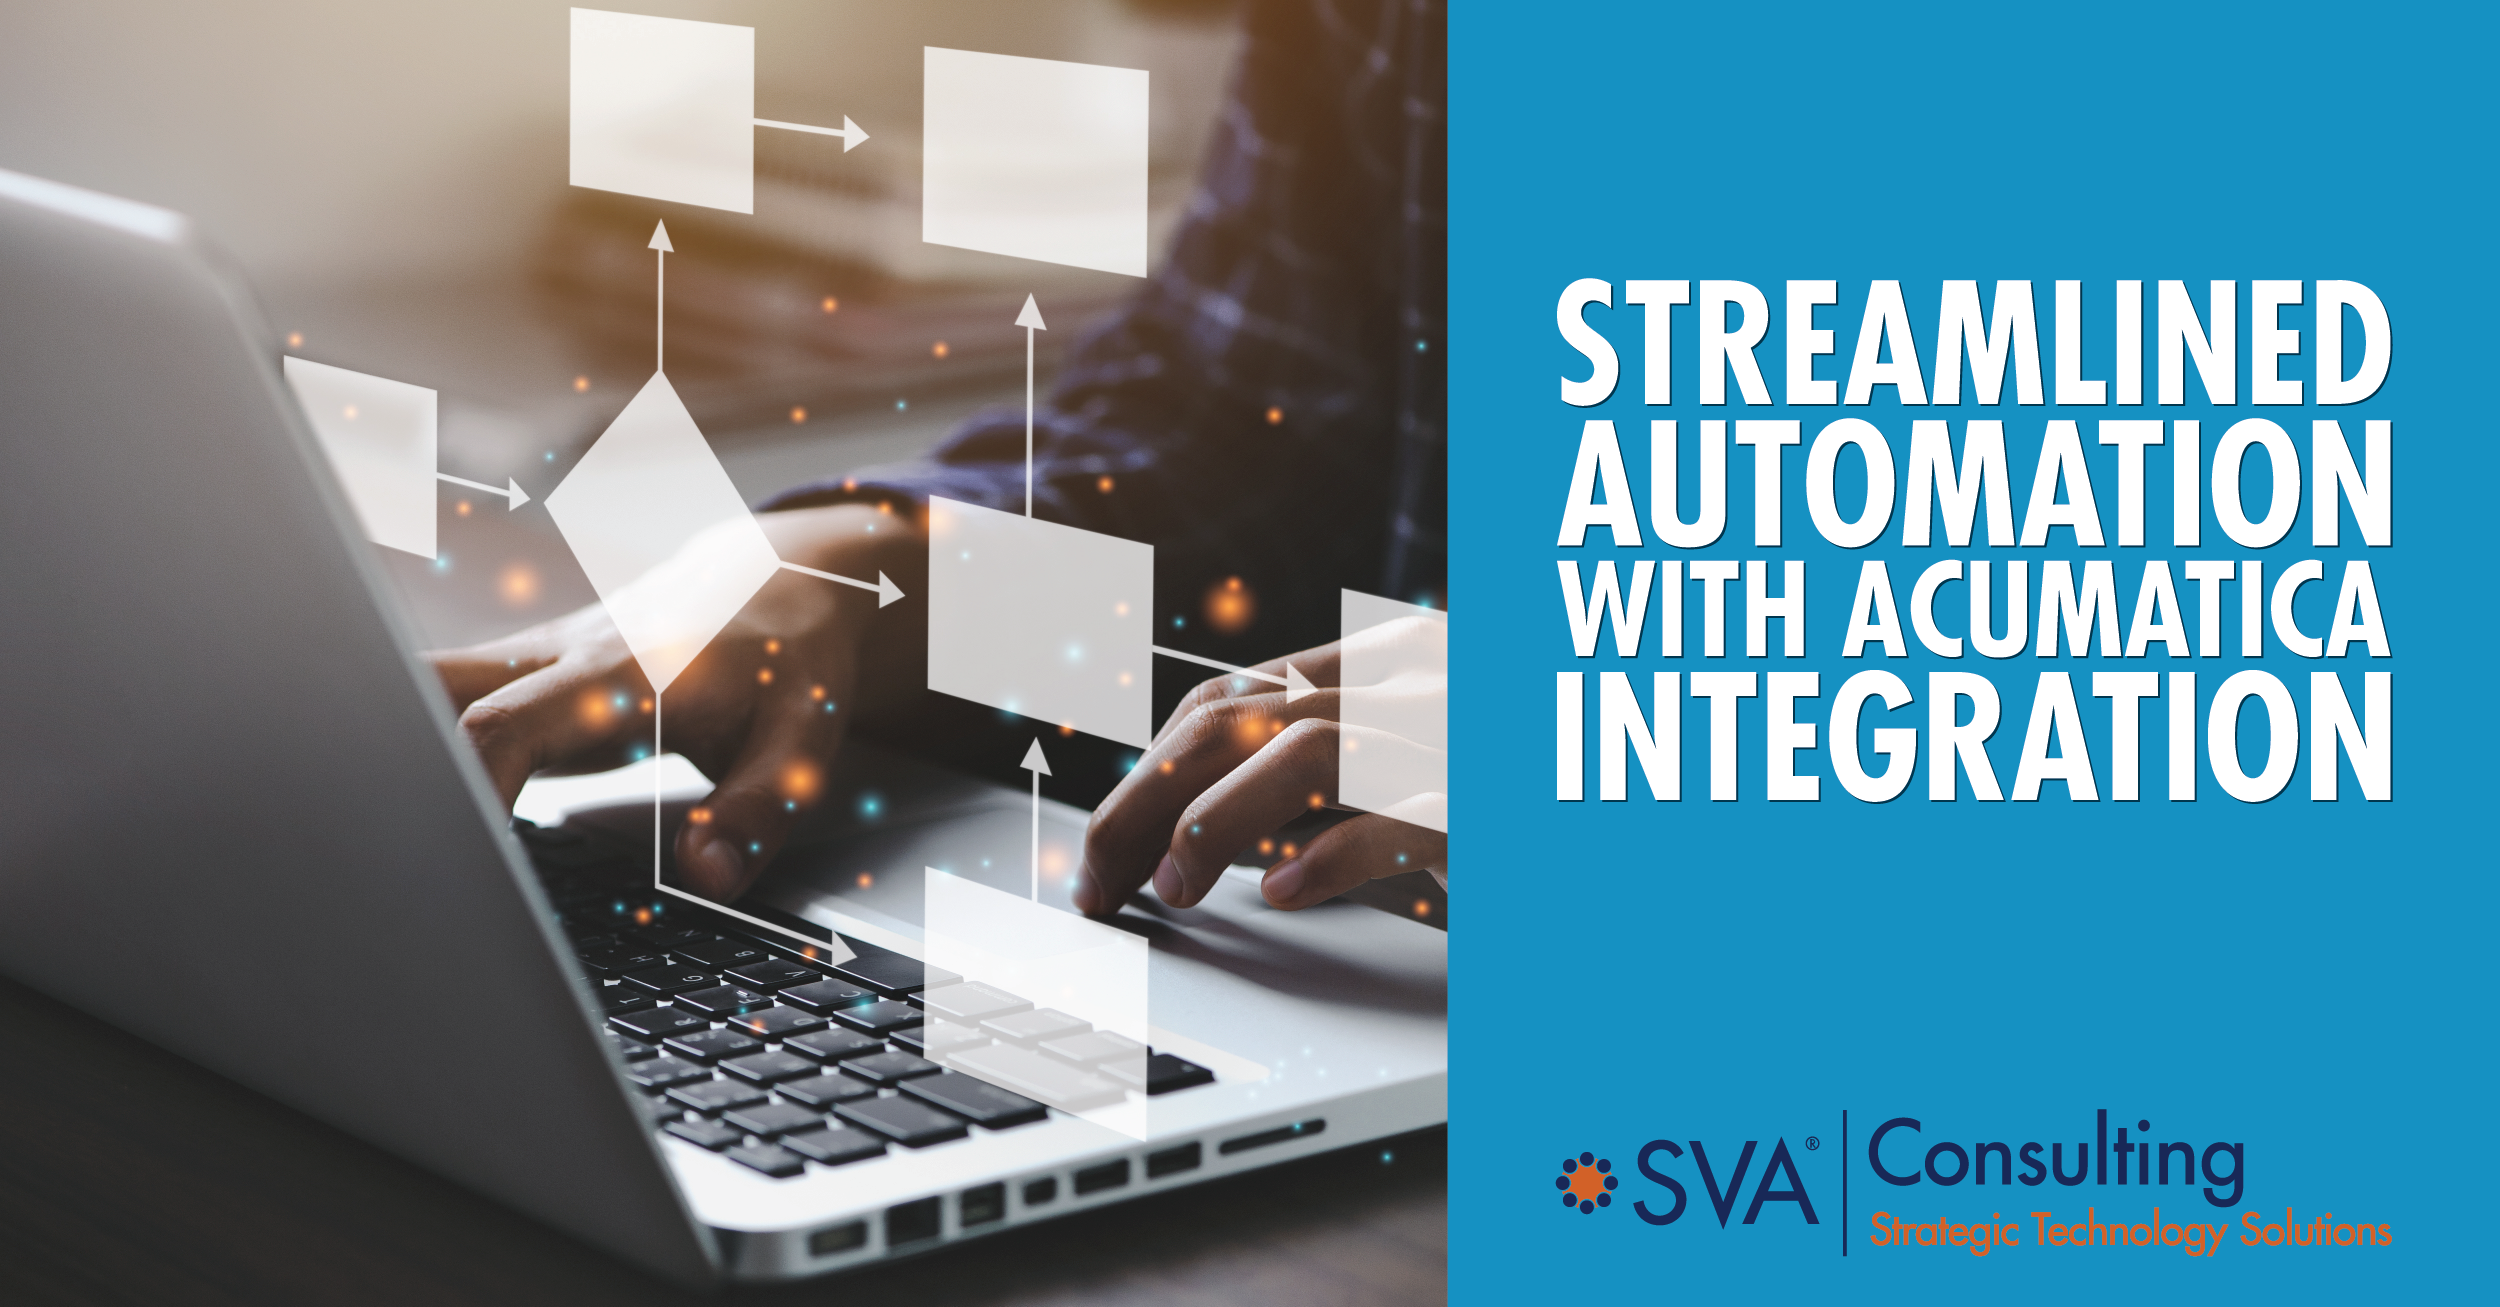 Streamlined Automation with Acumatica Integration